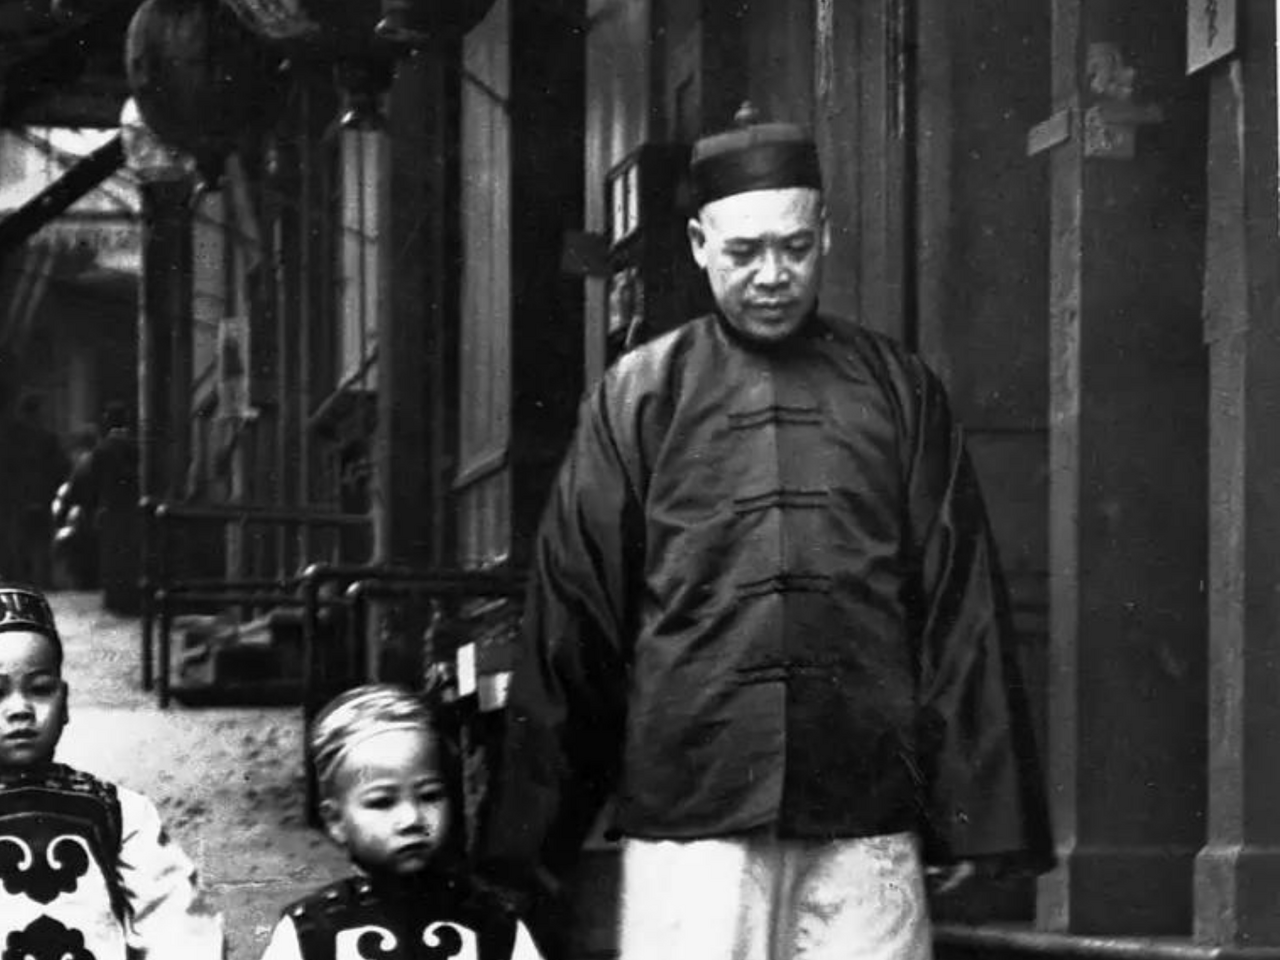 View of man and two children walking down street in the San Francisco Chinatown